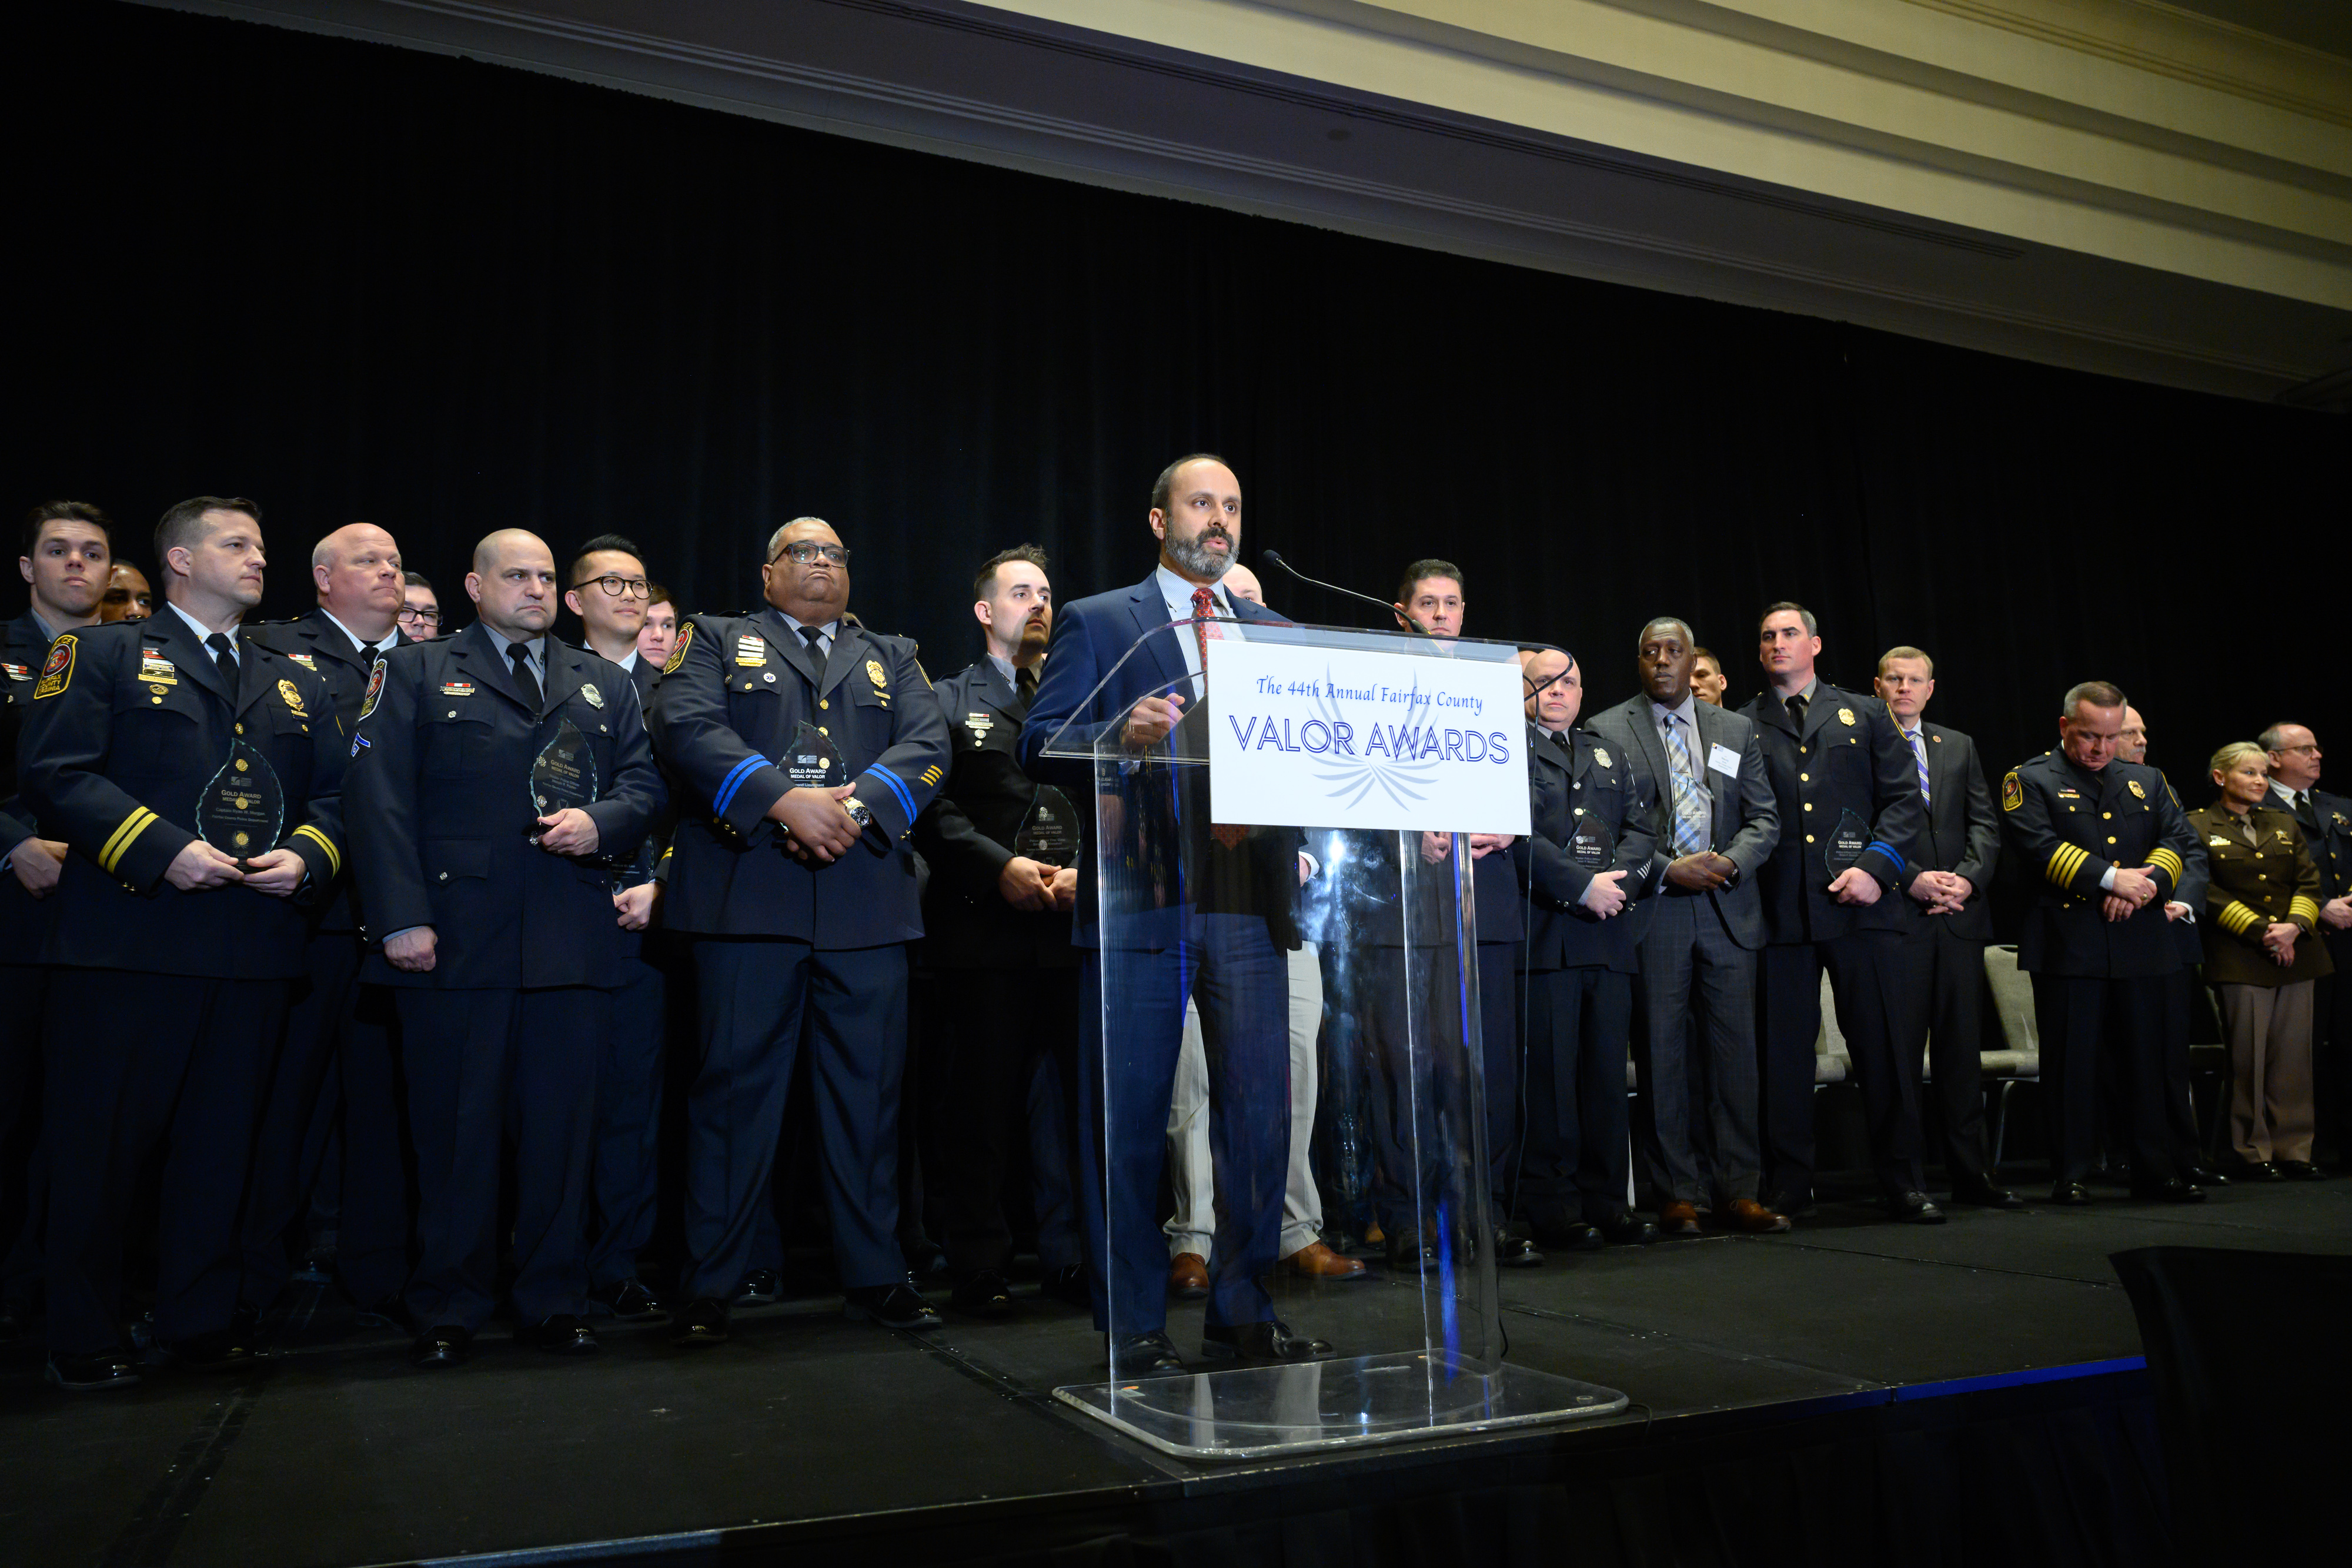 Image for Greater Reston Chamber of Commerce Hosts 44th Annual Fairfax County Valor Awards